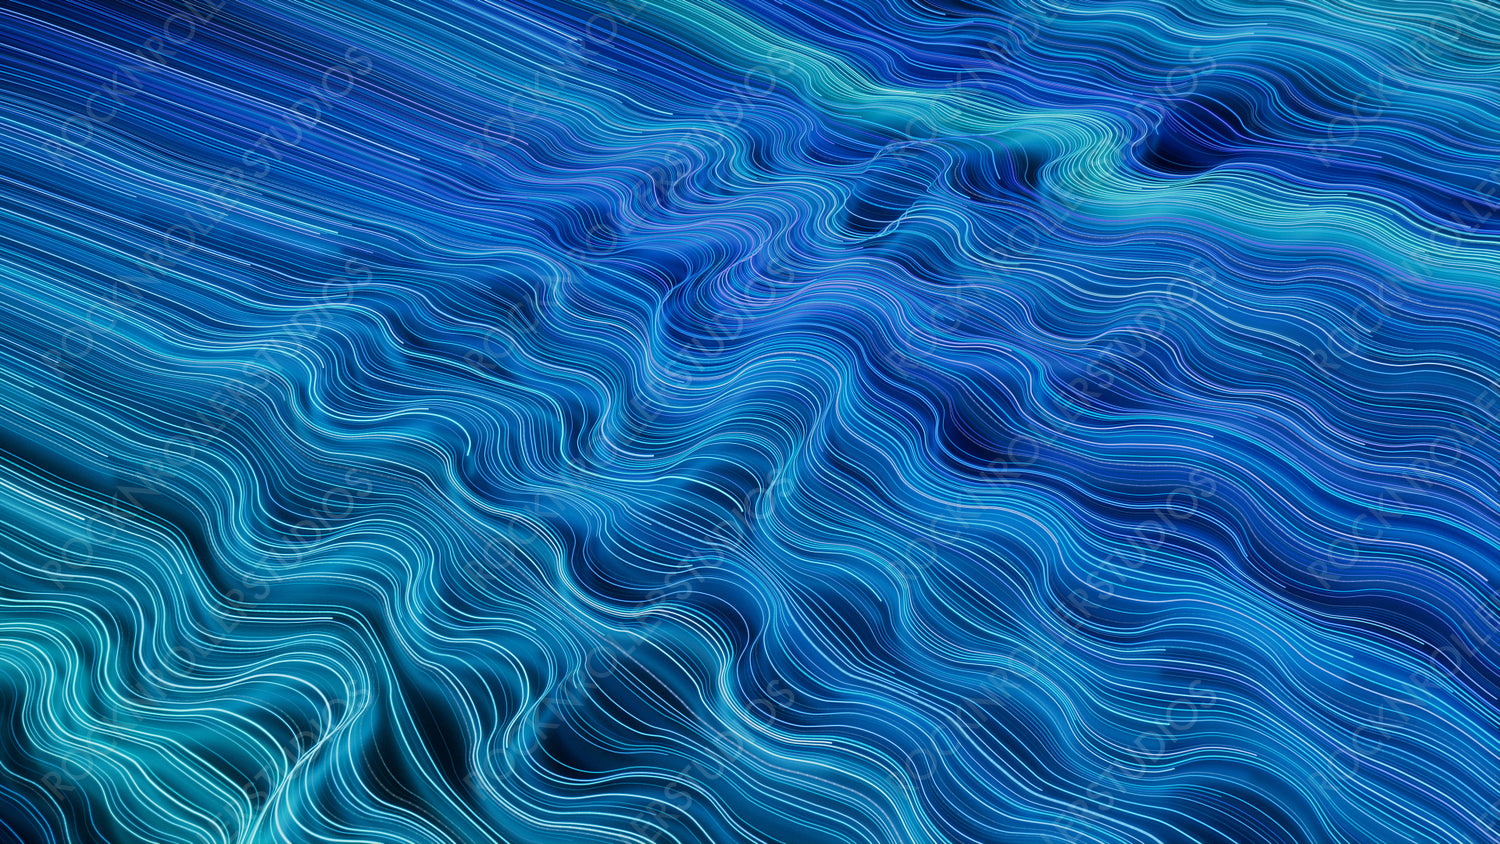 Blue, Purple and Turquoise Colored Curves form Colorful Neon Lines Background. 3D Render.